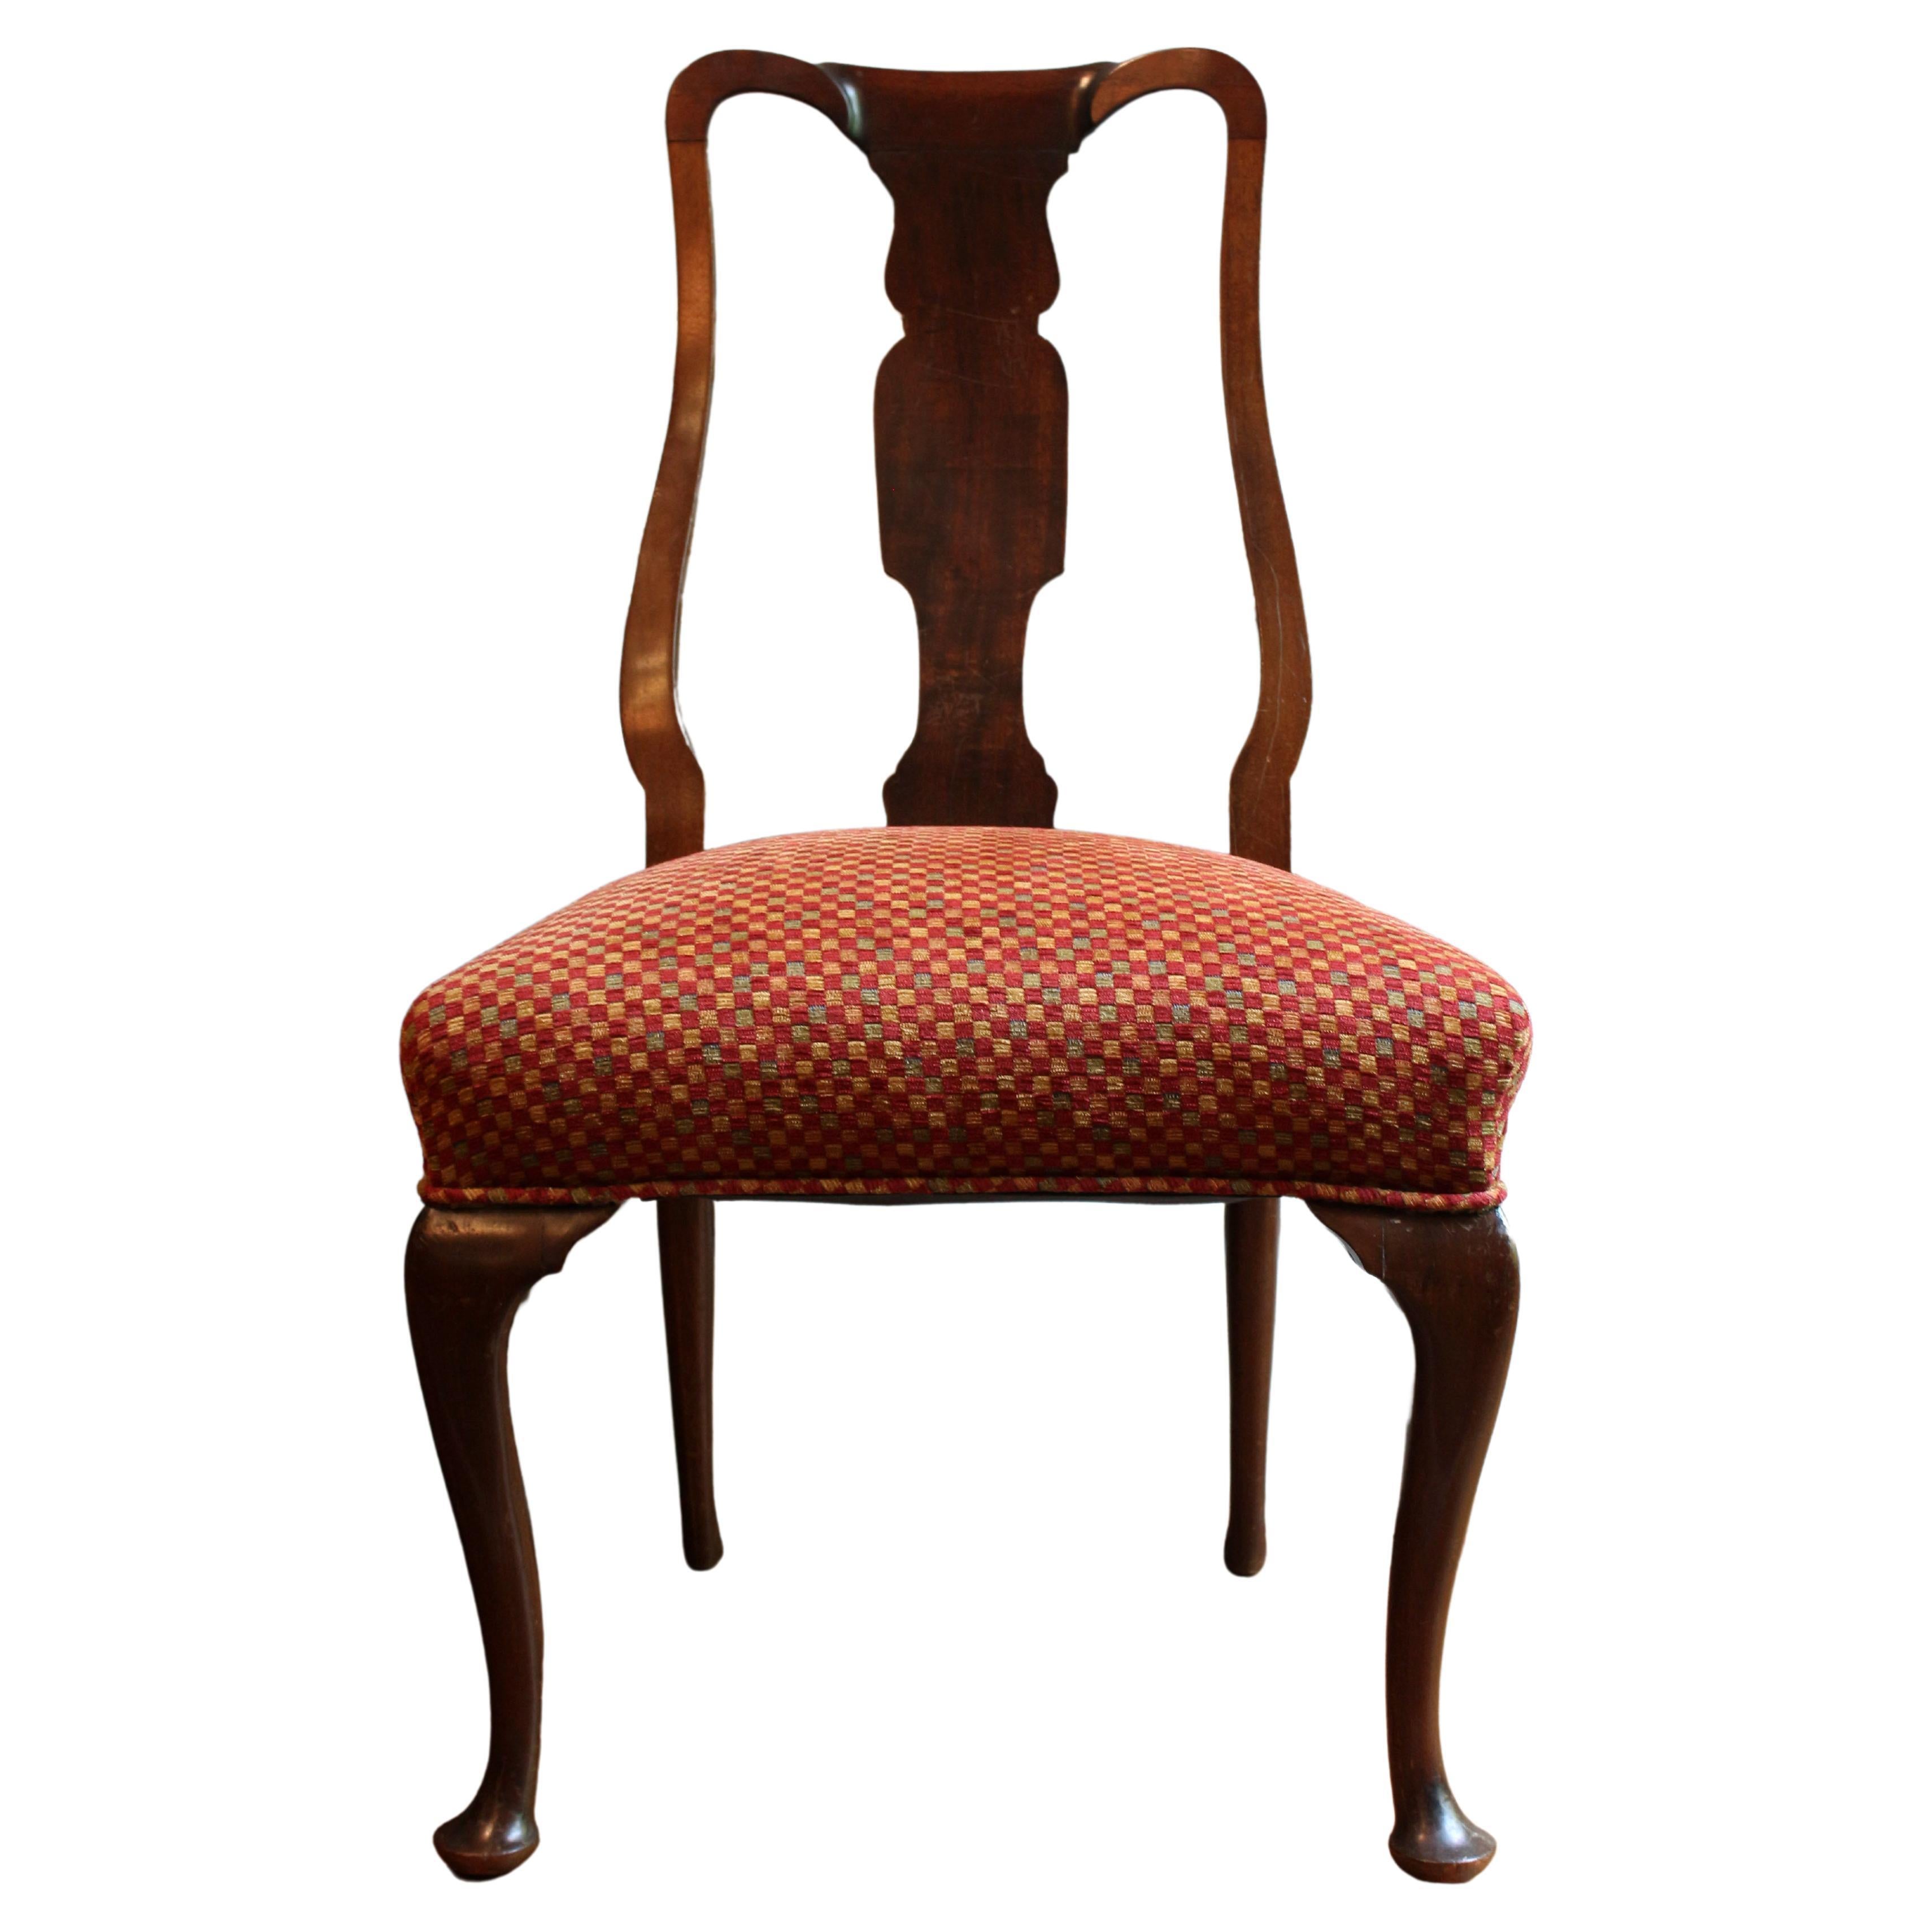 Late 19th Century Queen Anne Revival Style Side Chair For Sale